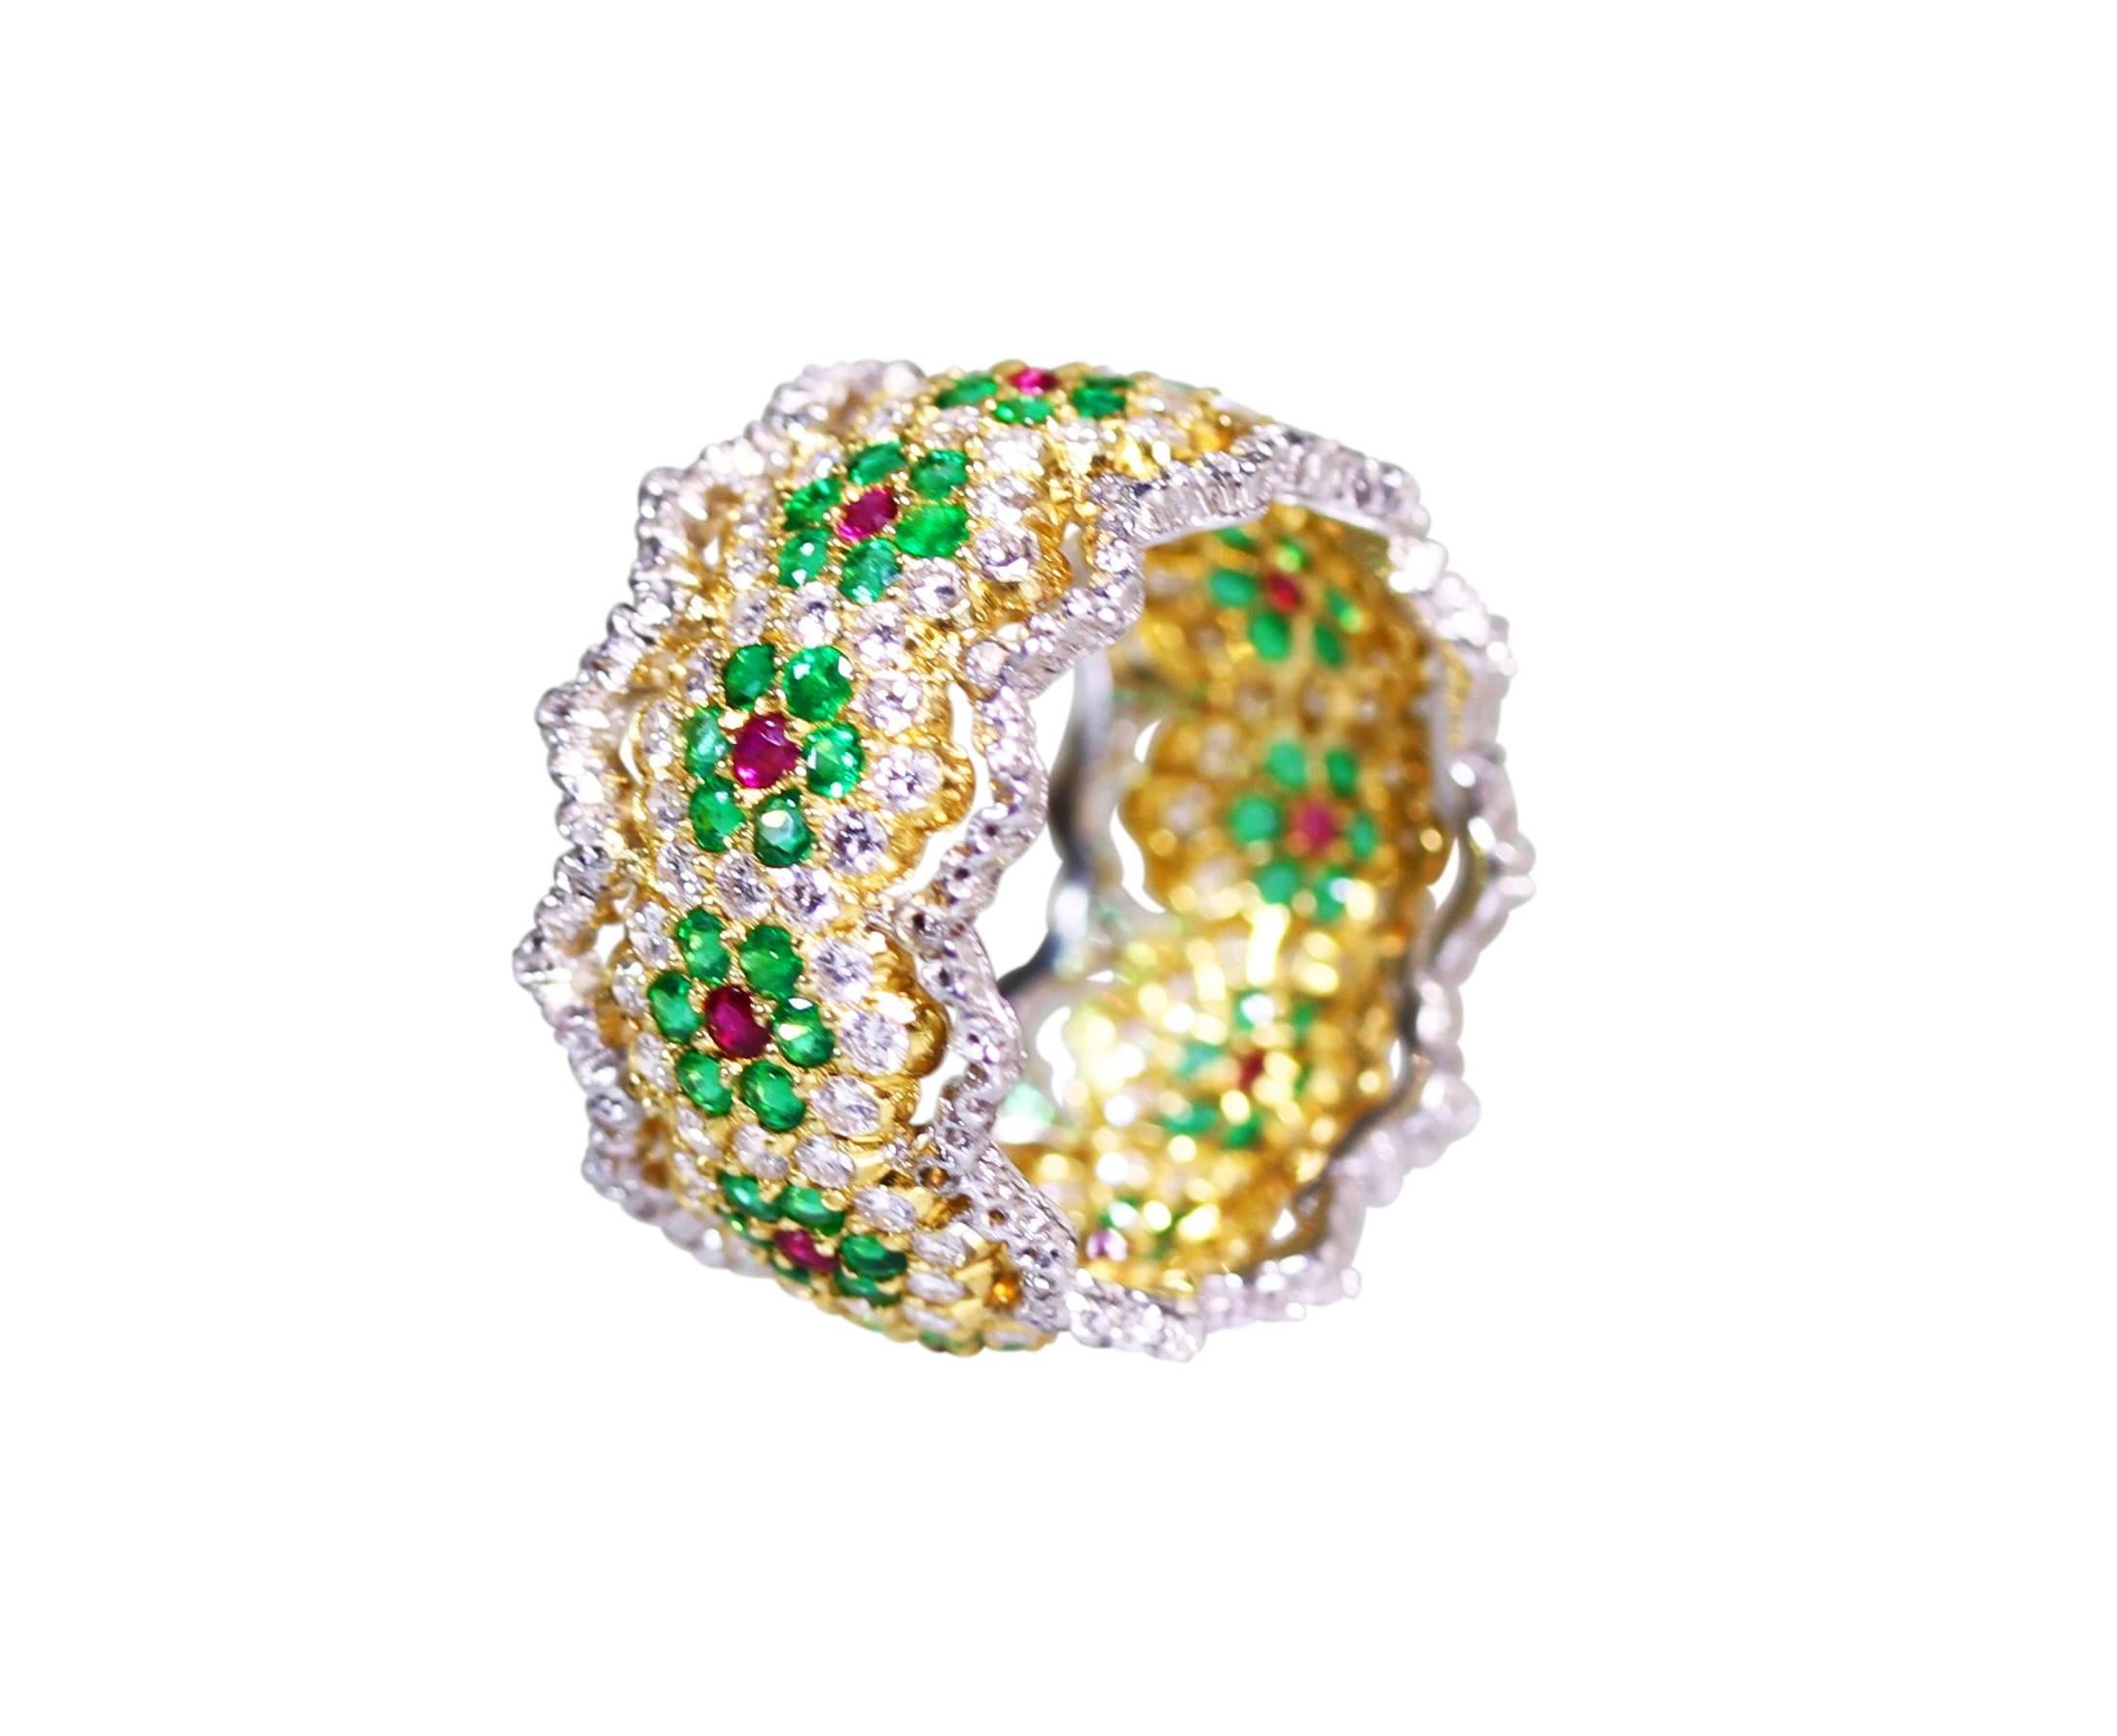 An 18 karat white and yellow gold, ruby, emerald and diamond ring by Buccellati, Italy, the wide band of openwork and floral design, set with 12 round rubies weighing approximately 0.35 carat, 72 round emeralds weighing approximately 1.50 carats,